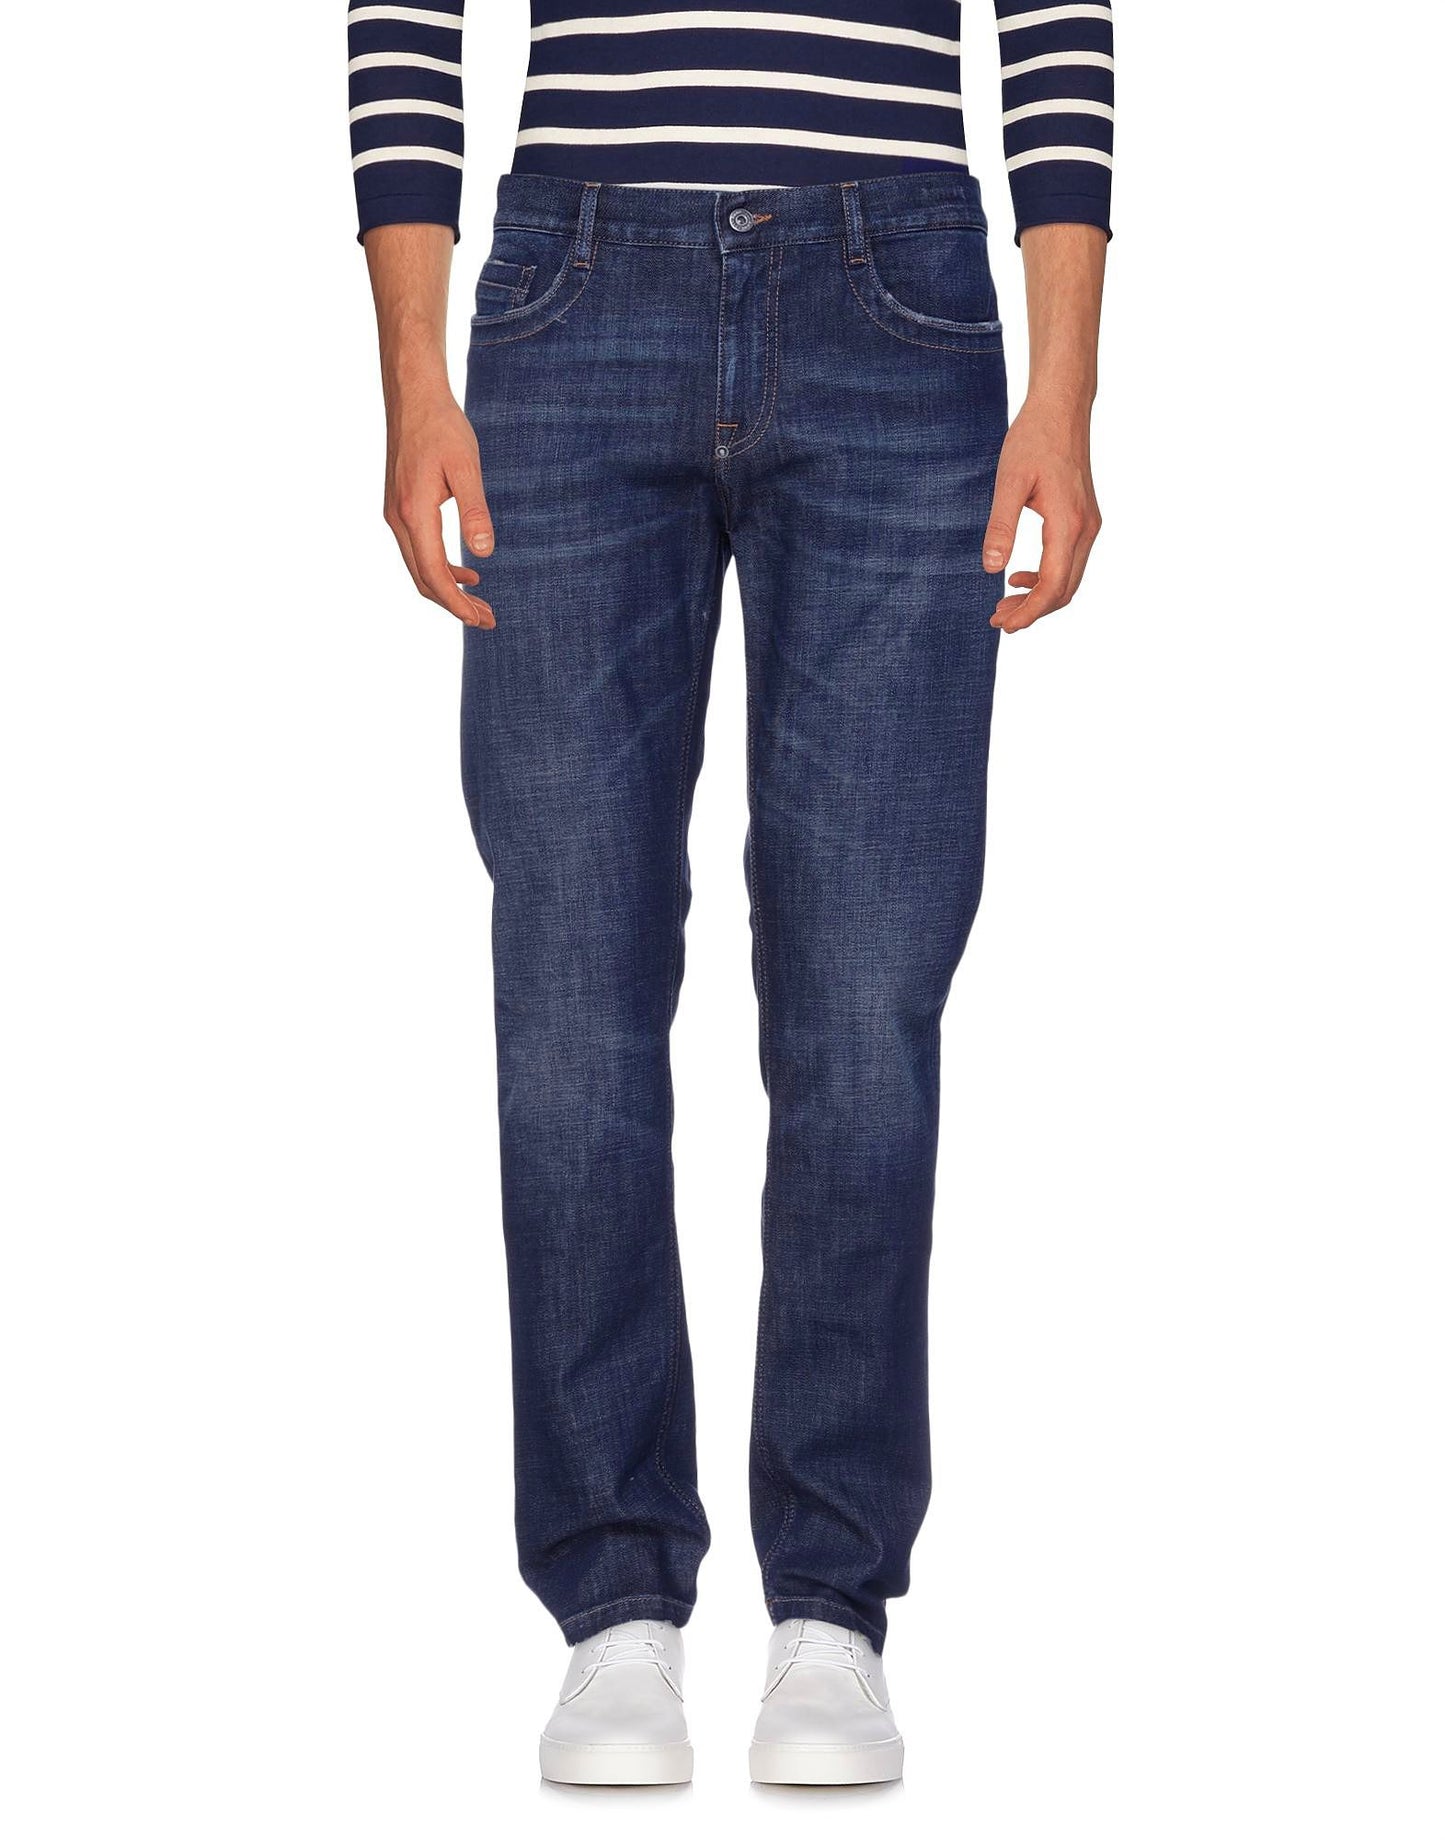 Dark Blue Men's Regular Fit Jeans - Designed by Bikkembergs Available to Buy at a Discounted Price on Moon Behind The Hill Online Designer Discount Store